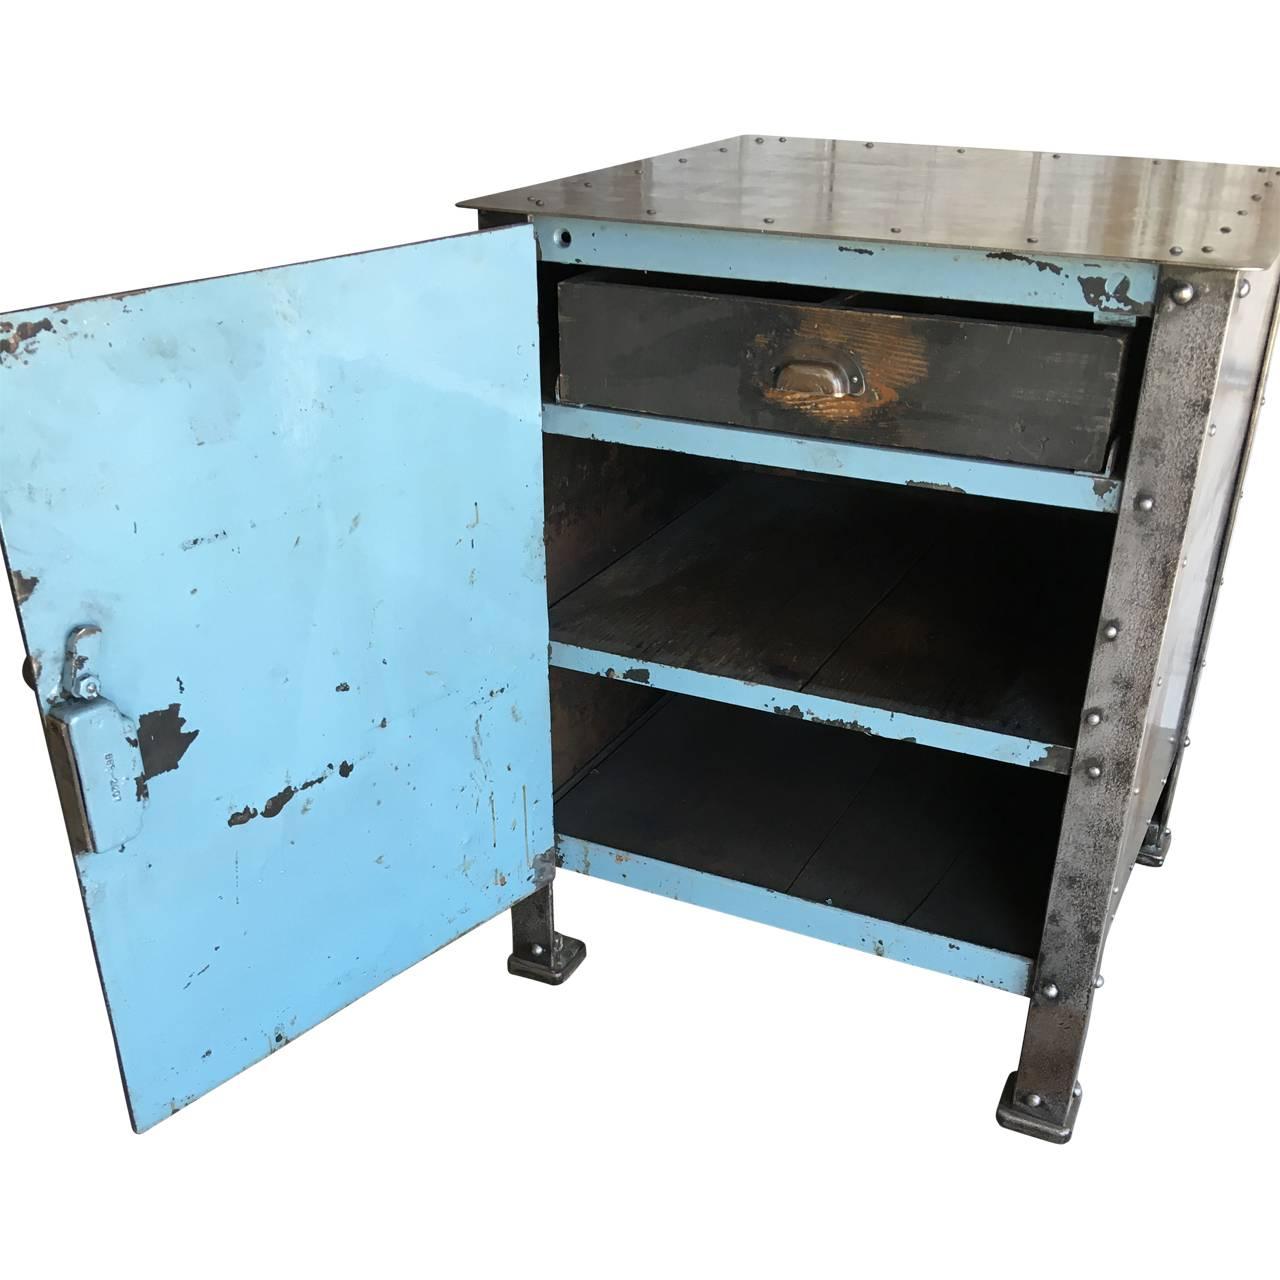 Industrial Metal Cabinet, circa early 1900's.
American made, hand riveted locking cabinet from a textile factory in Reading PA. The cabinet was used for the textile workers to secure their sheers and tools for their workstation. The interior has the